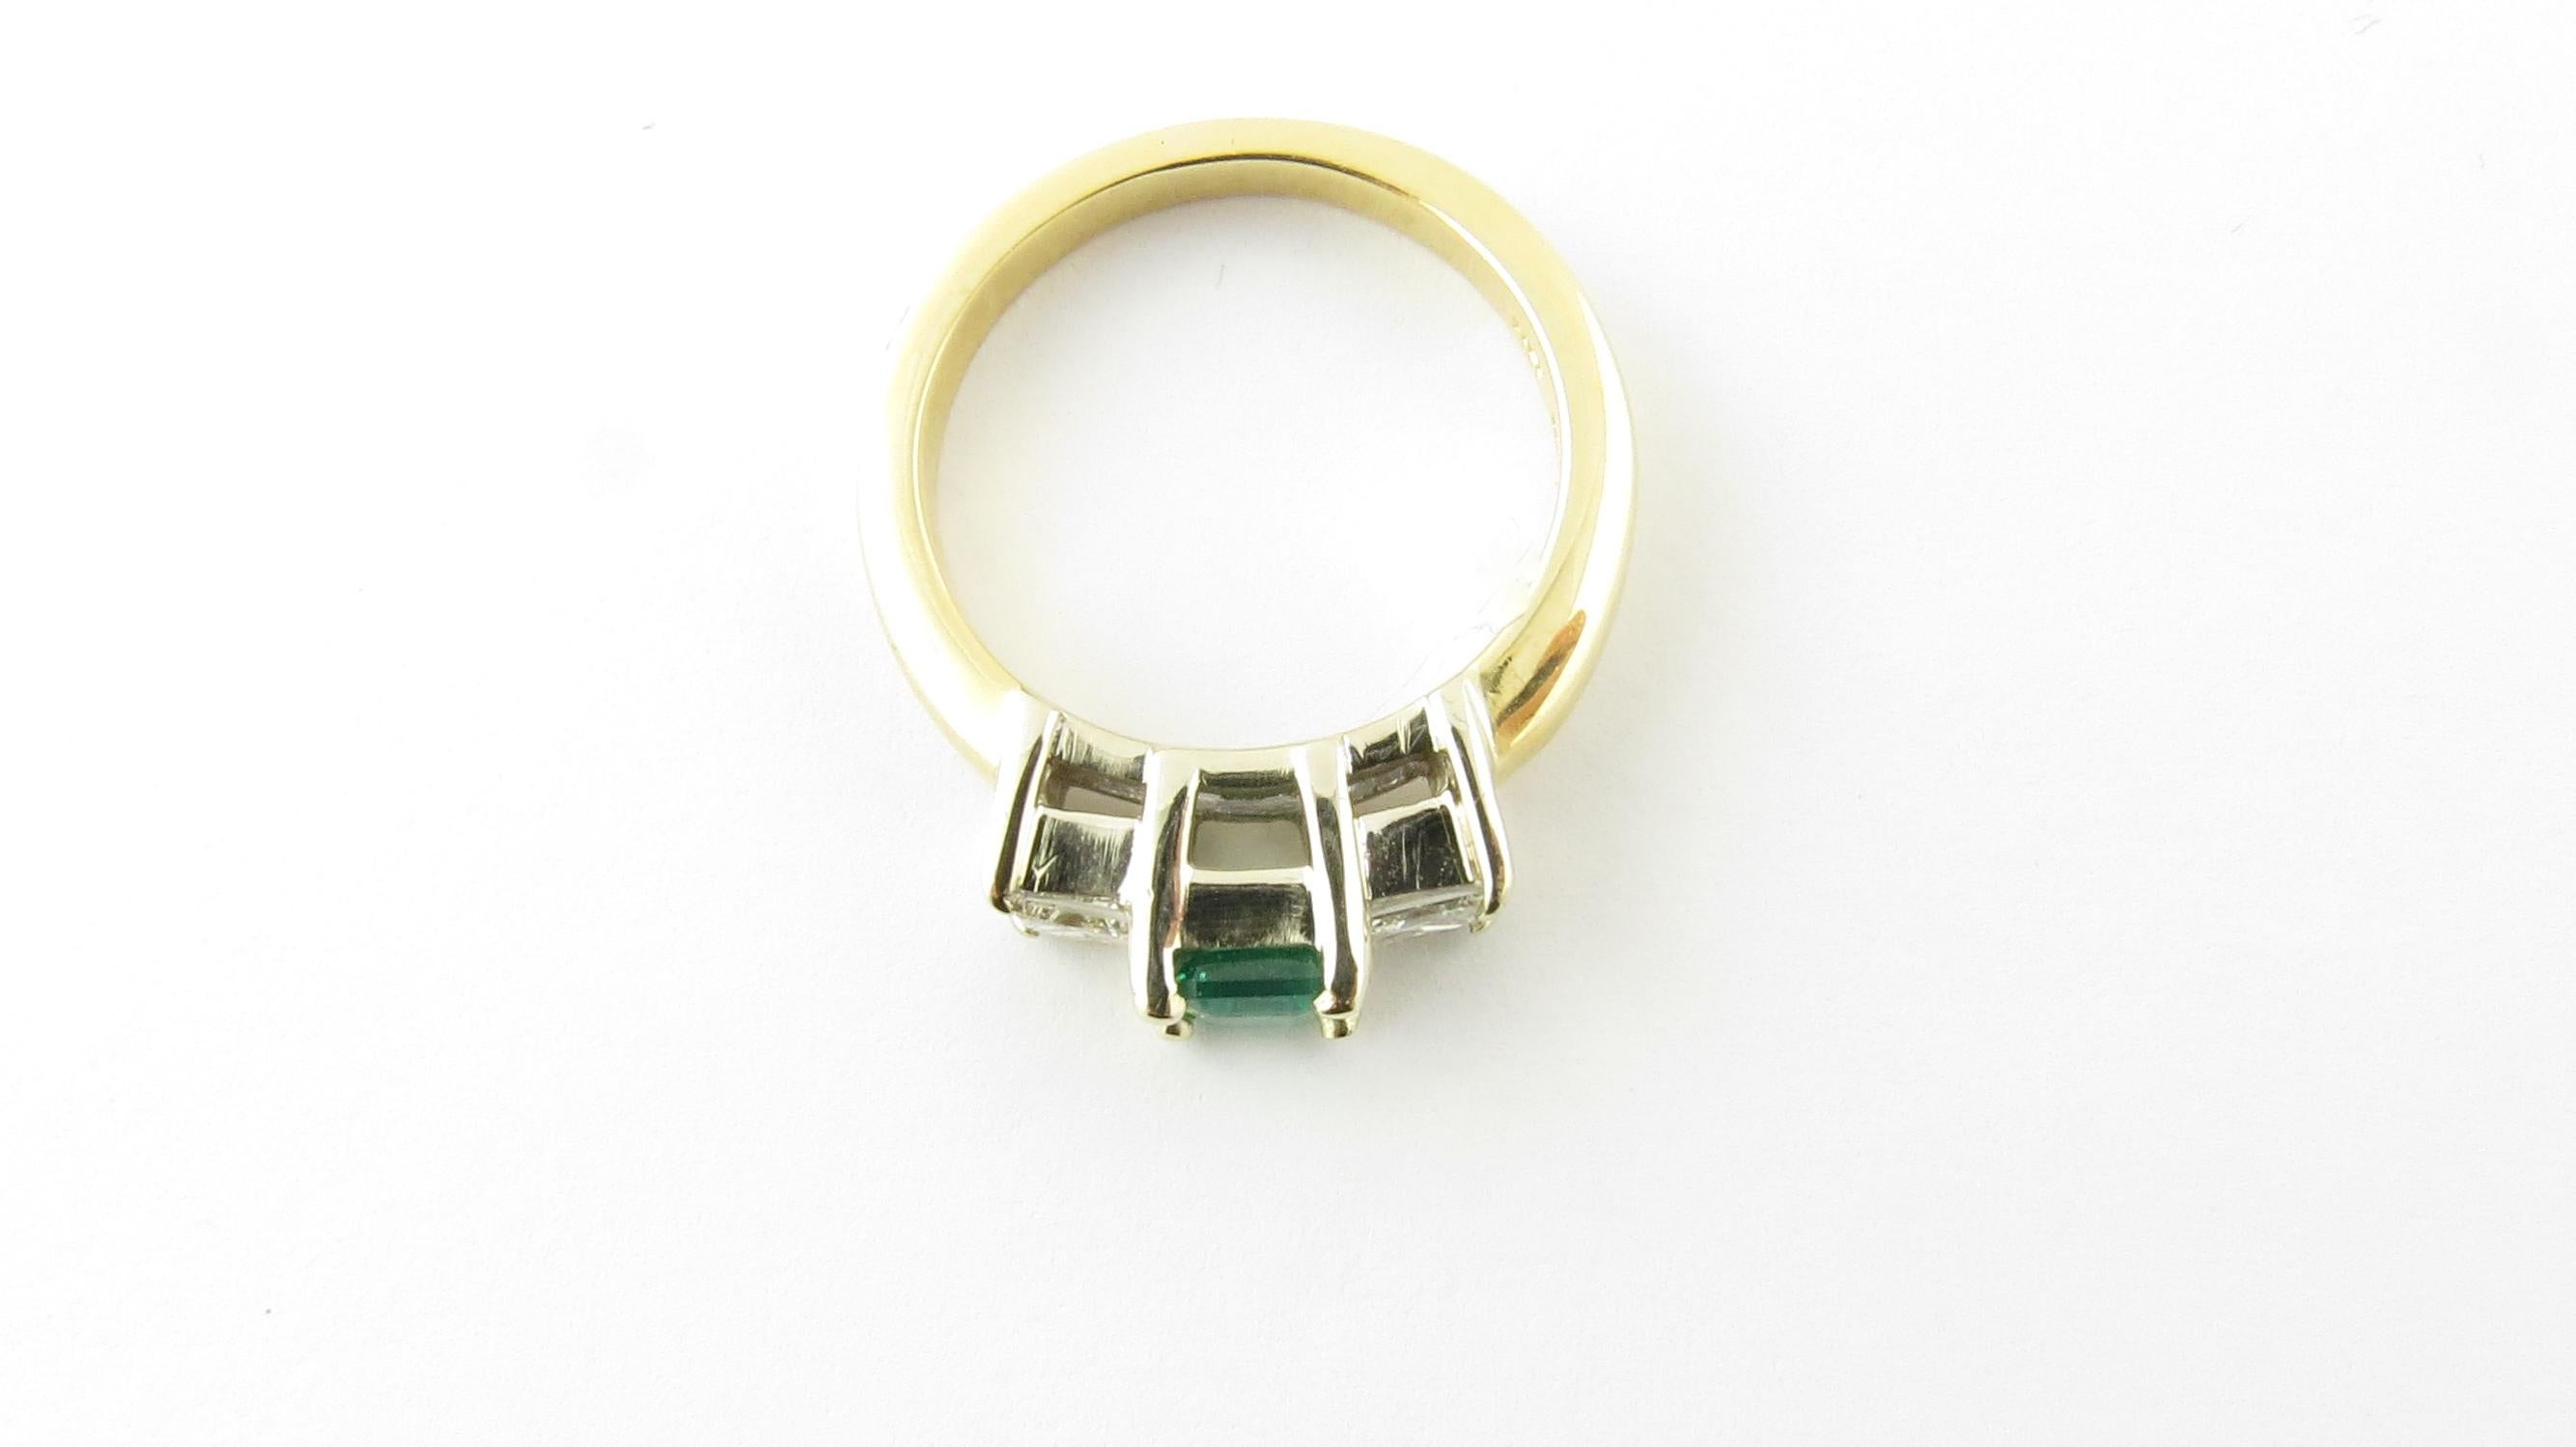 Vintage 18 Karat Yellow Gold Natural Emerald and Diamond Ring Size 5.5-

This lovely ring features one genuine emerald (approx. 5 mm x 4 mm) and two princess cut diamonds set in classic 18K yellow gold.  

Shank measures 2.5 mm.

Approximate total